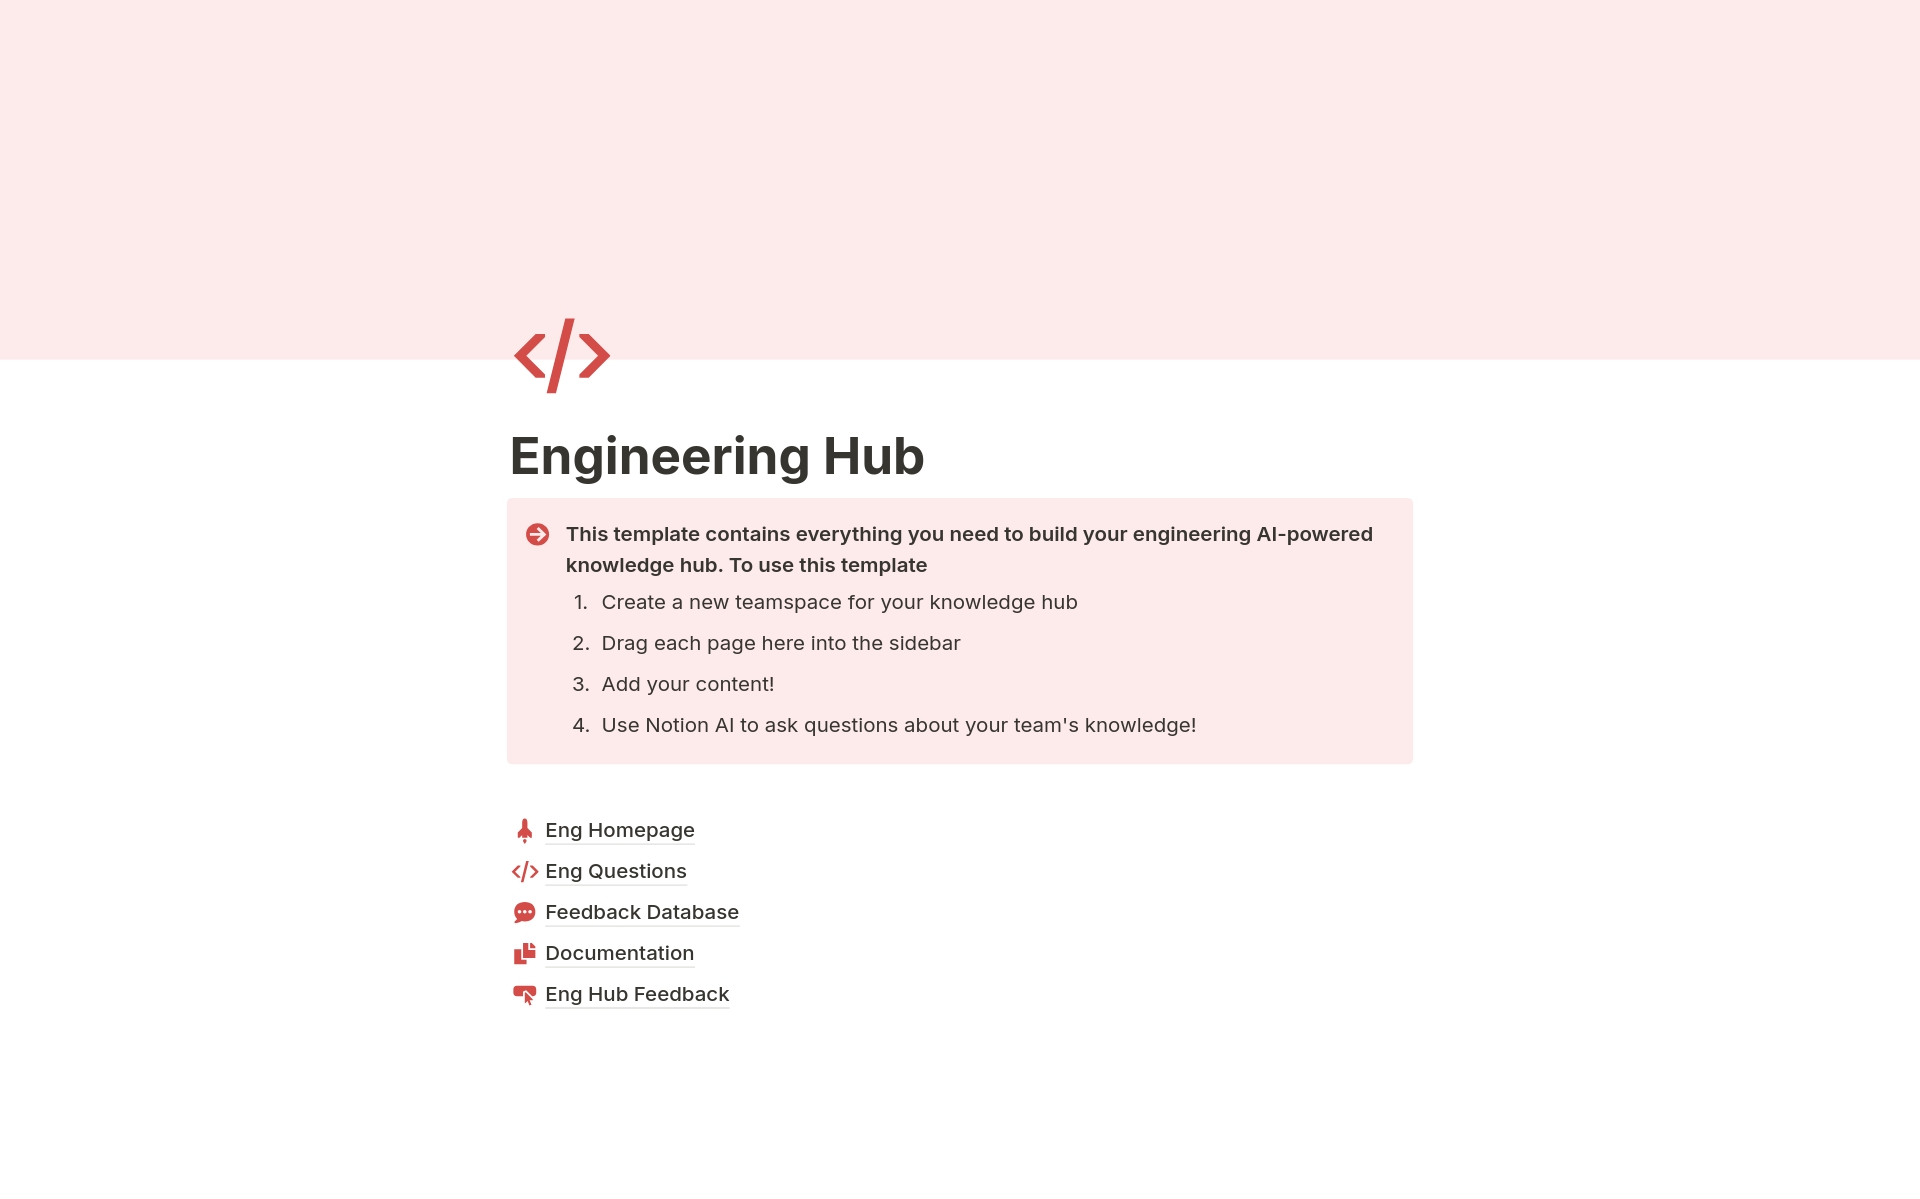 Boost your development team's productivity with this AI-powered Engineering Hub template, designed for efficient project management and collaboration.